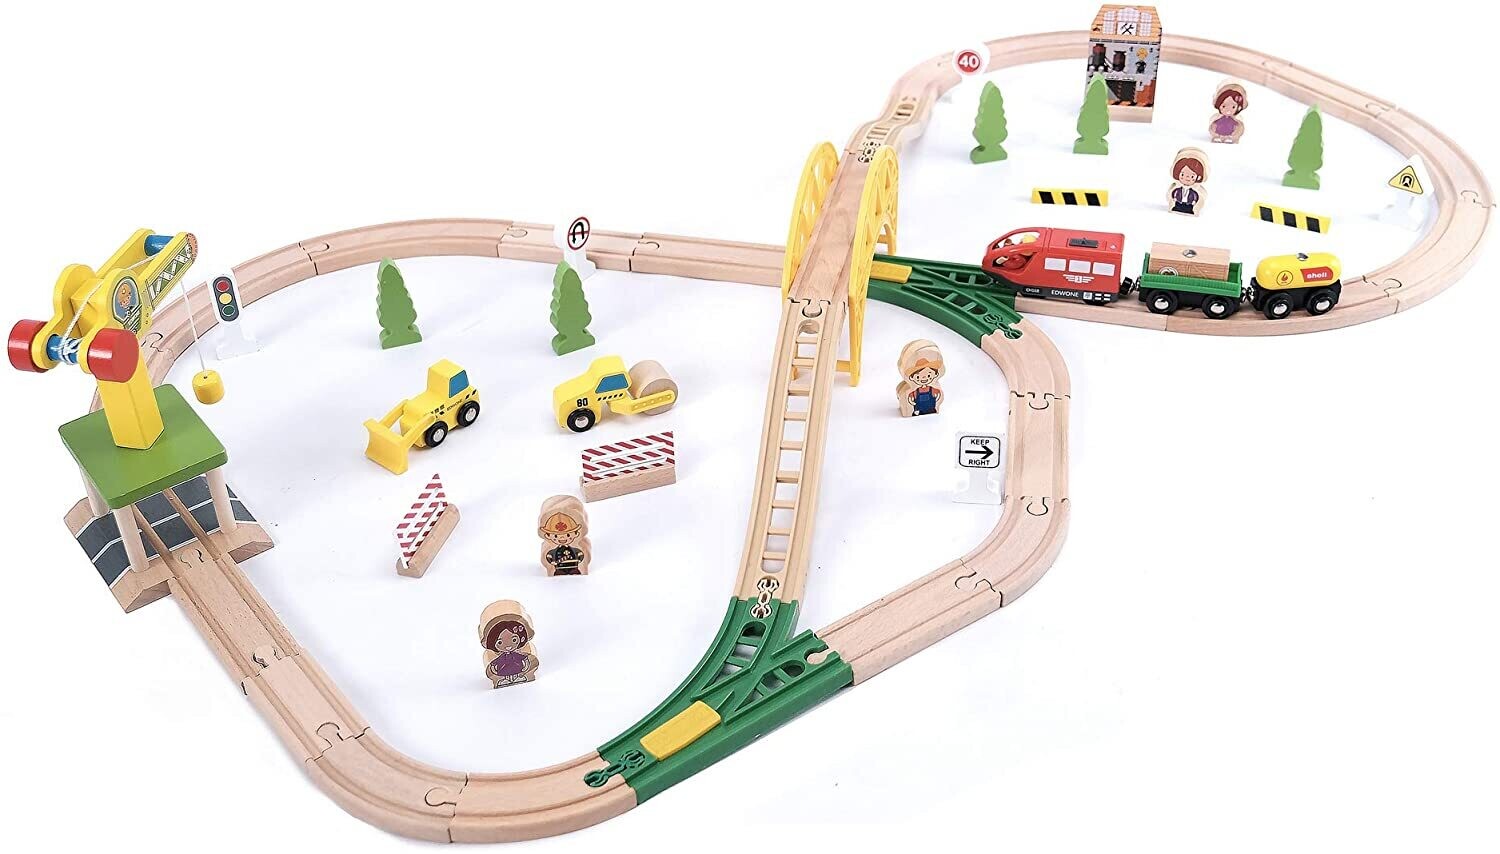 Wooden Toy Train Set with Wooden Rails Including Accessories - Children's Toy with Locomotive, Crane, Bridge and More